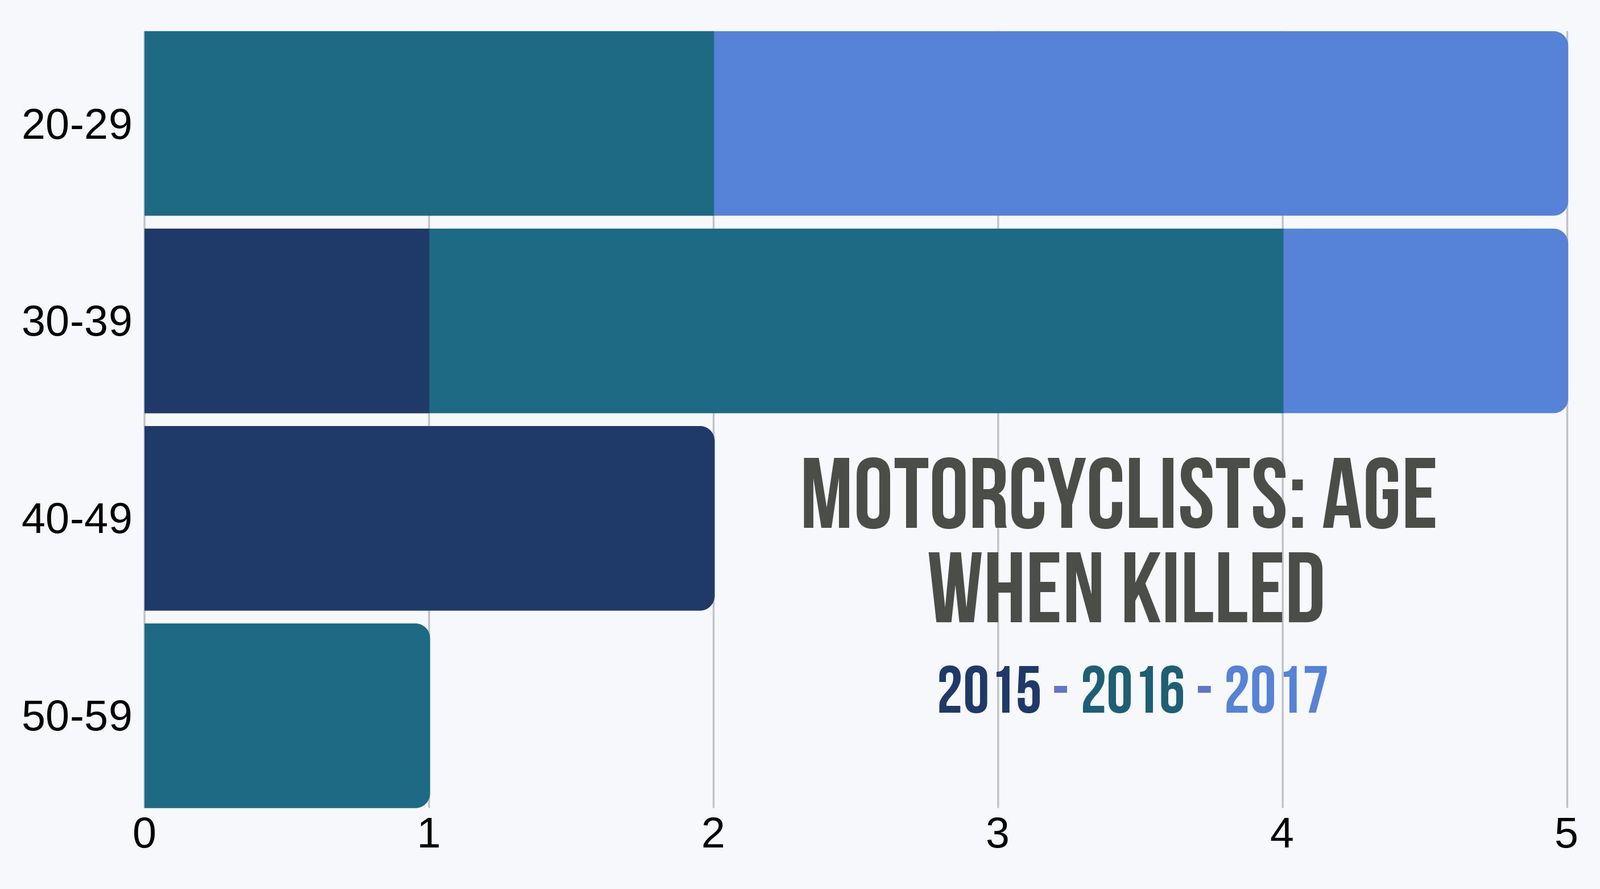 Age for motorcycle deaths in DC 2015-2017